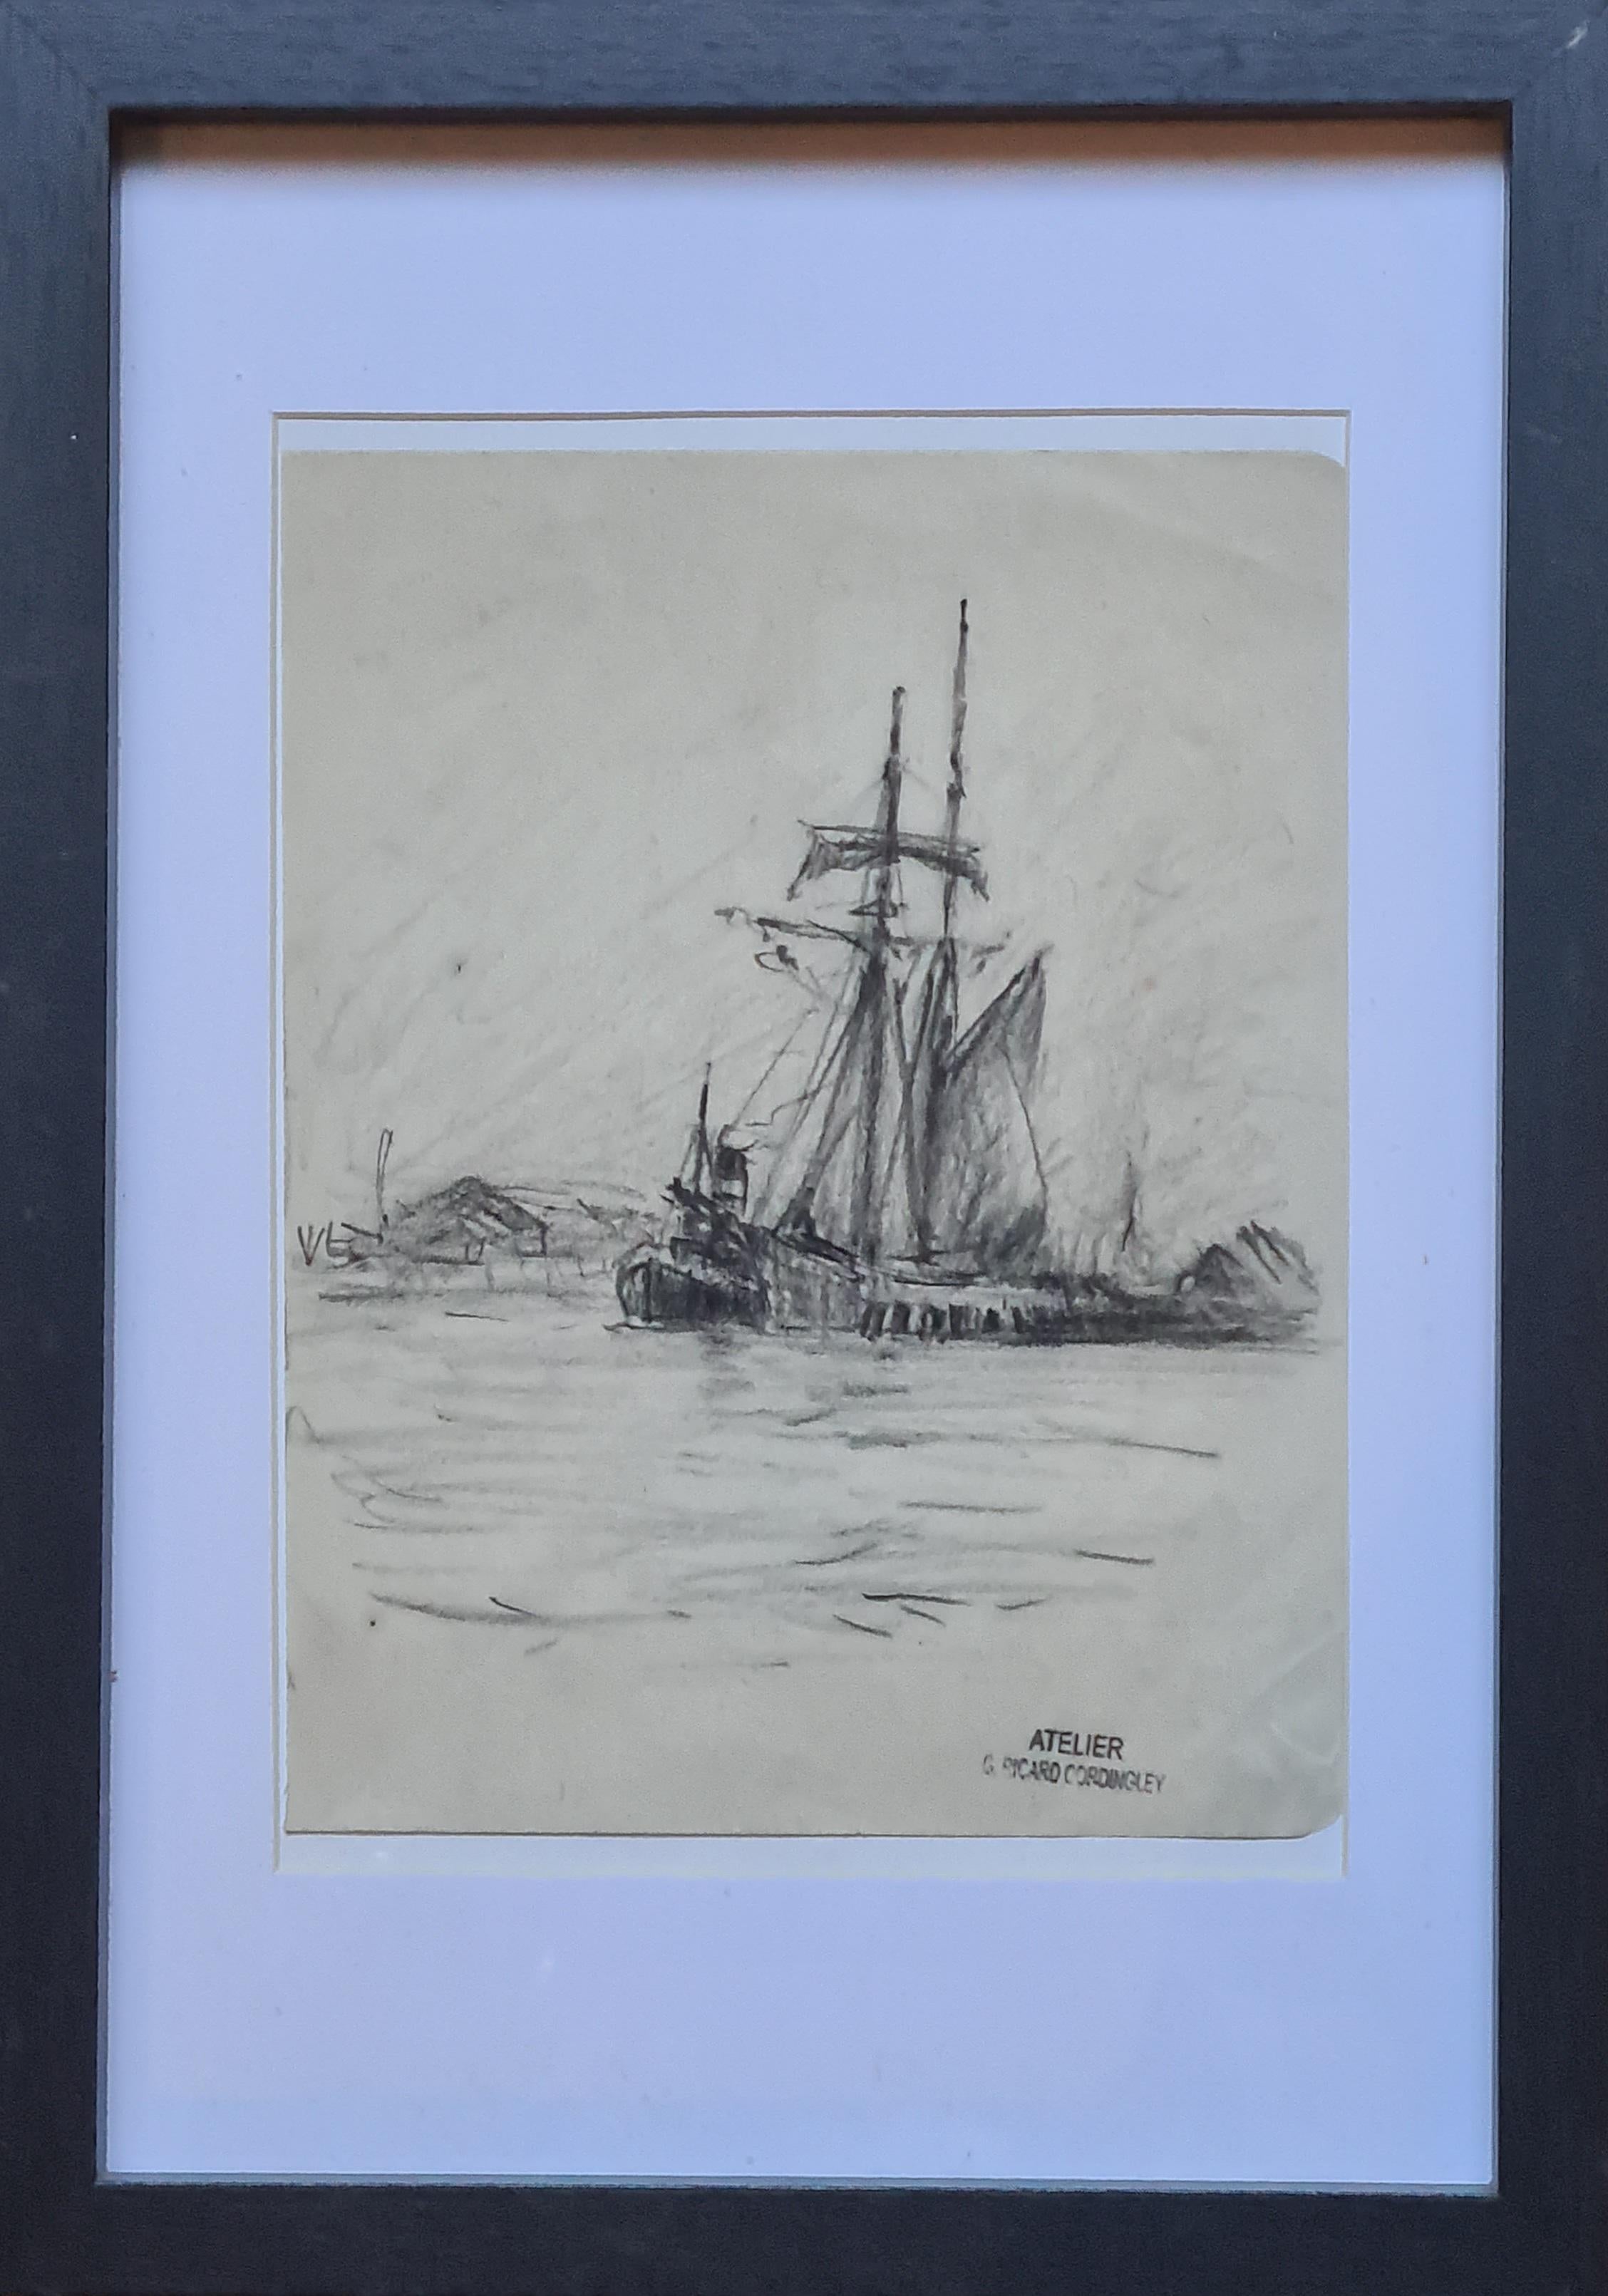 Late 19th century drawing on paper of a French marine scene by noted French artist Georges Ricard-Cordingley. Carrying the atelier stamp to the bottom right, presented in modern black frame.

Provenance: This drawing came from the estate of the